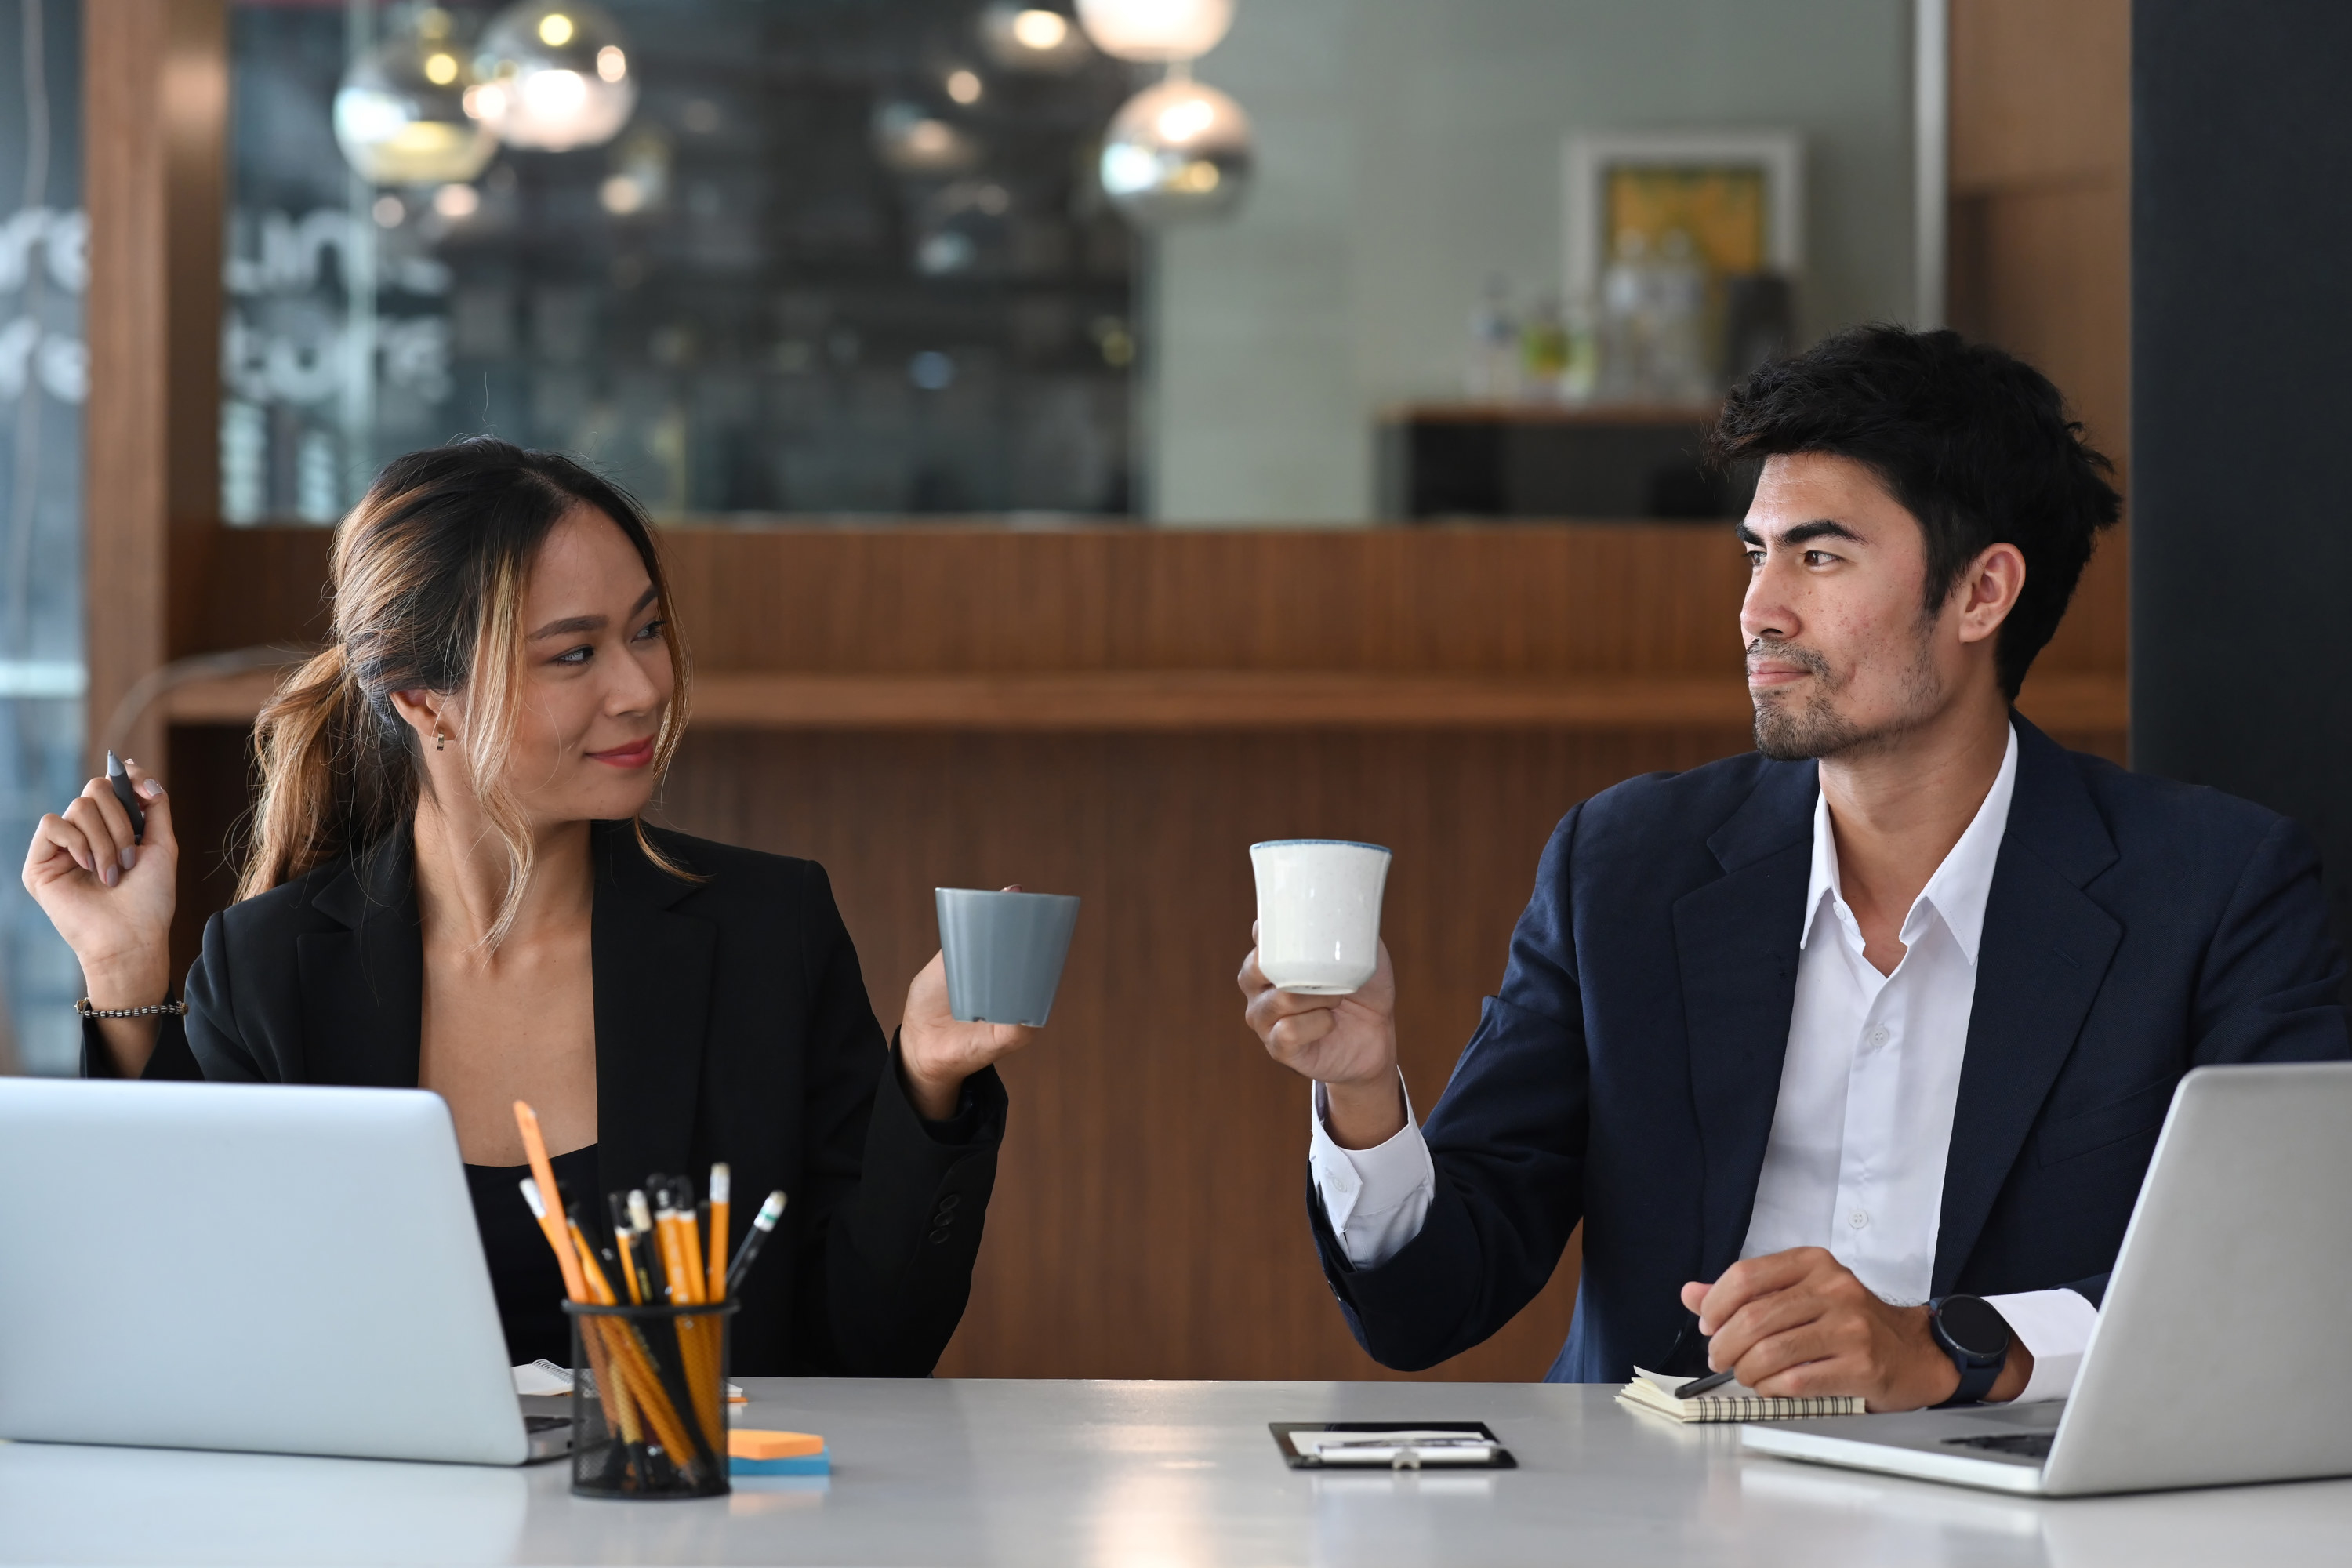 Man and woman sitting at a desk holding up their coffee mugs